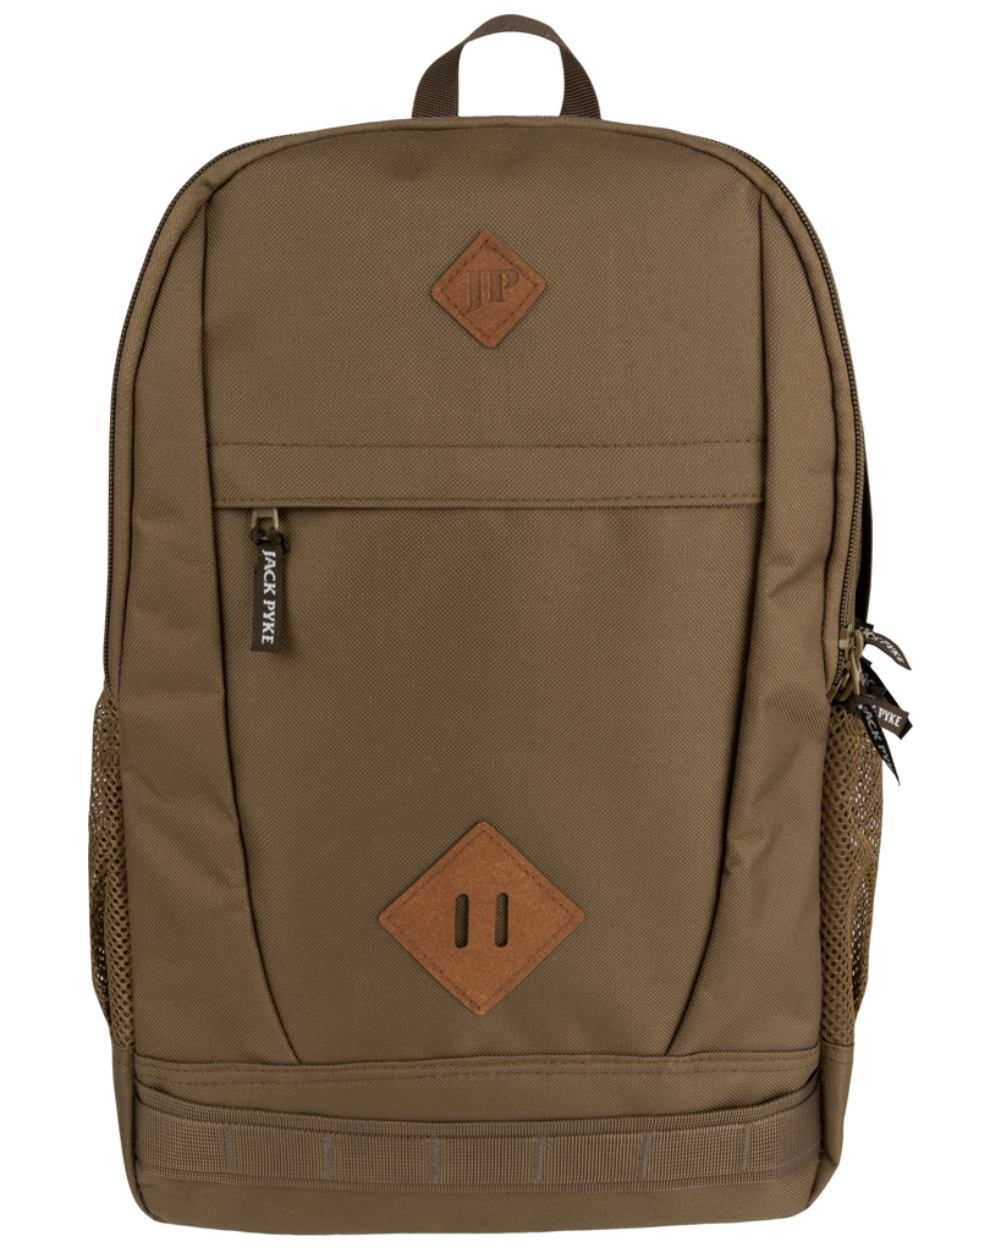 Olive Brown Coloured Jack Pyke Falcon Rucksack On A White Background 